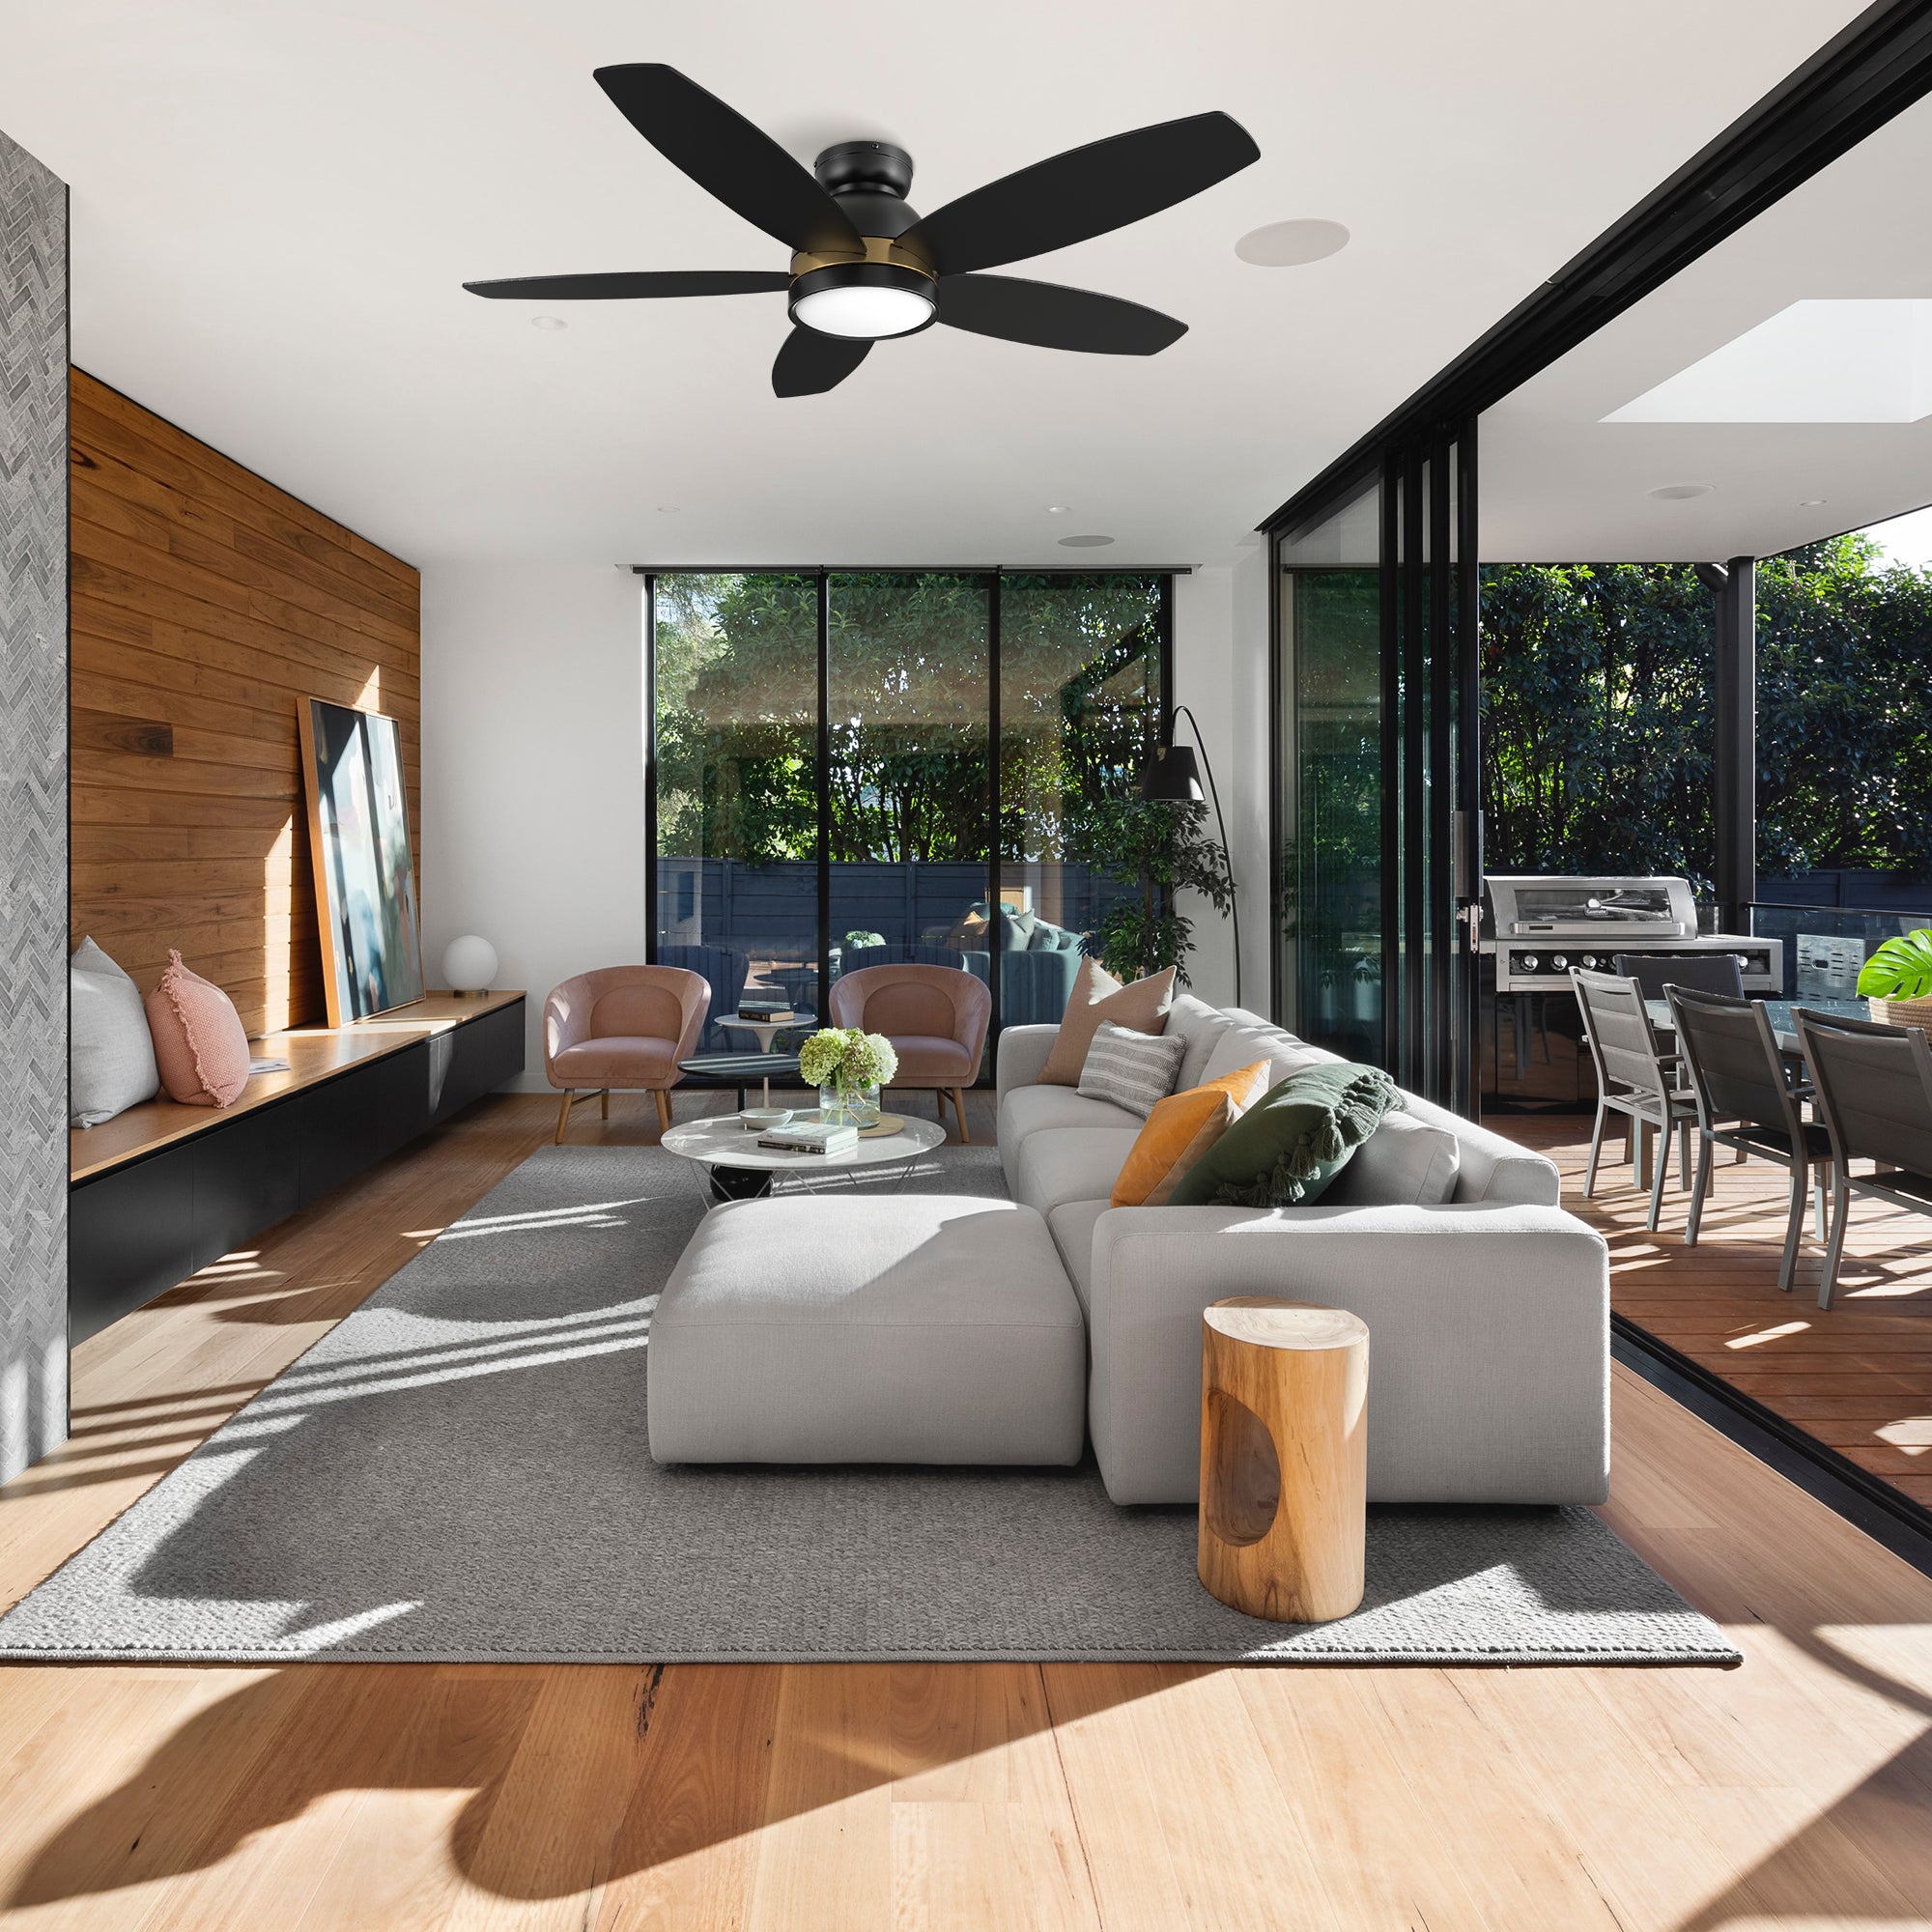 This Levi 48&#39;&#39; smart ceiling fan keeps your space cool, bright, and stylish. It is a soft modern masterpiece perfect for your large indoor living spaces. The fan features Remote control, Wi-Fi apps, Siri Shortcut and Voice control technology (compatible with Amazon Alexa and Google Home Assistant ) to set fan preferences. 